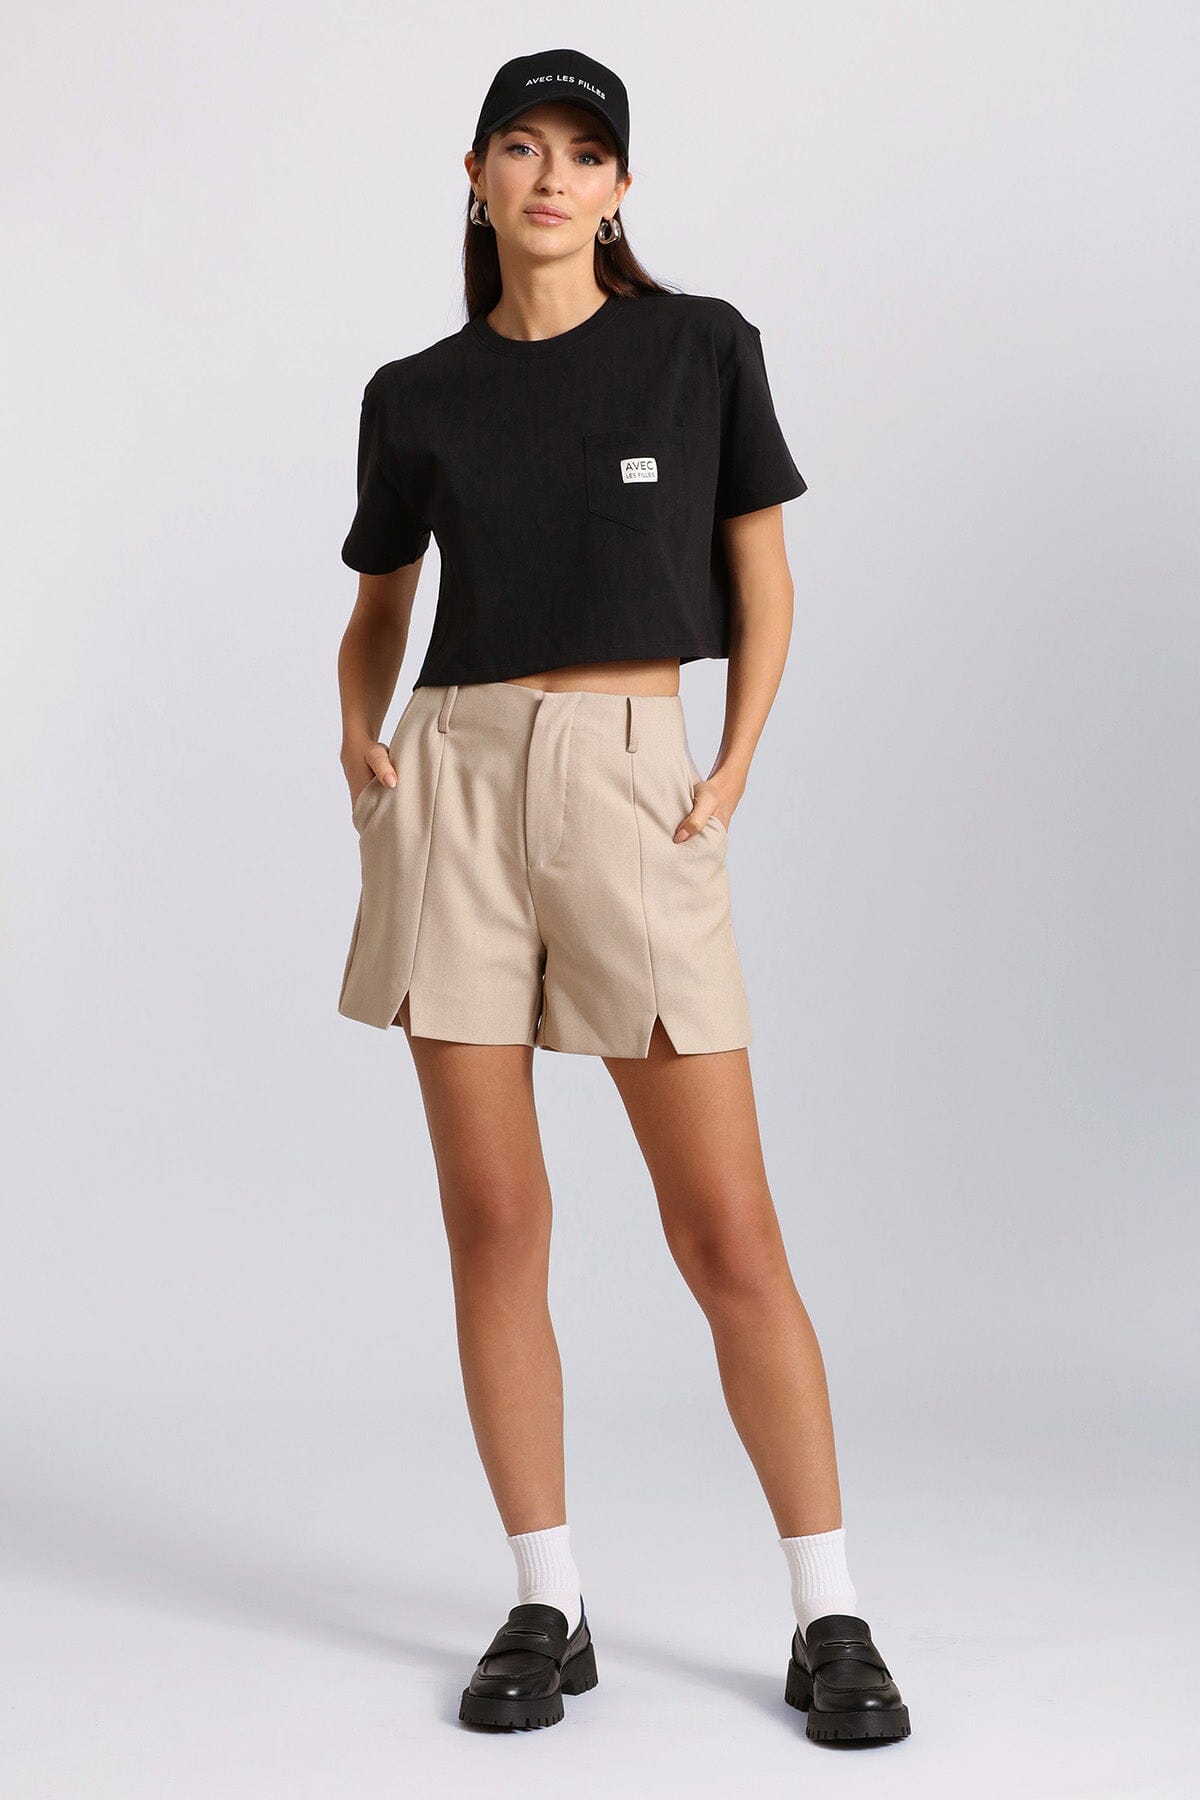 Tan high waist tailored shorts for summer 2024 fashion by Avec Les Filles